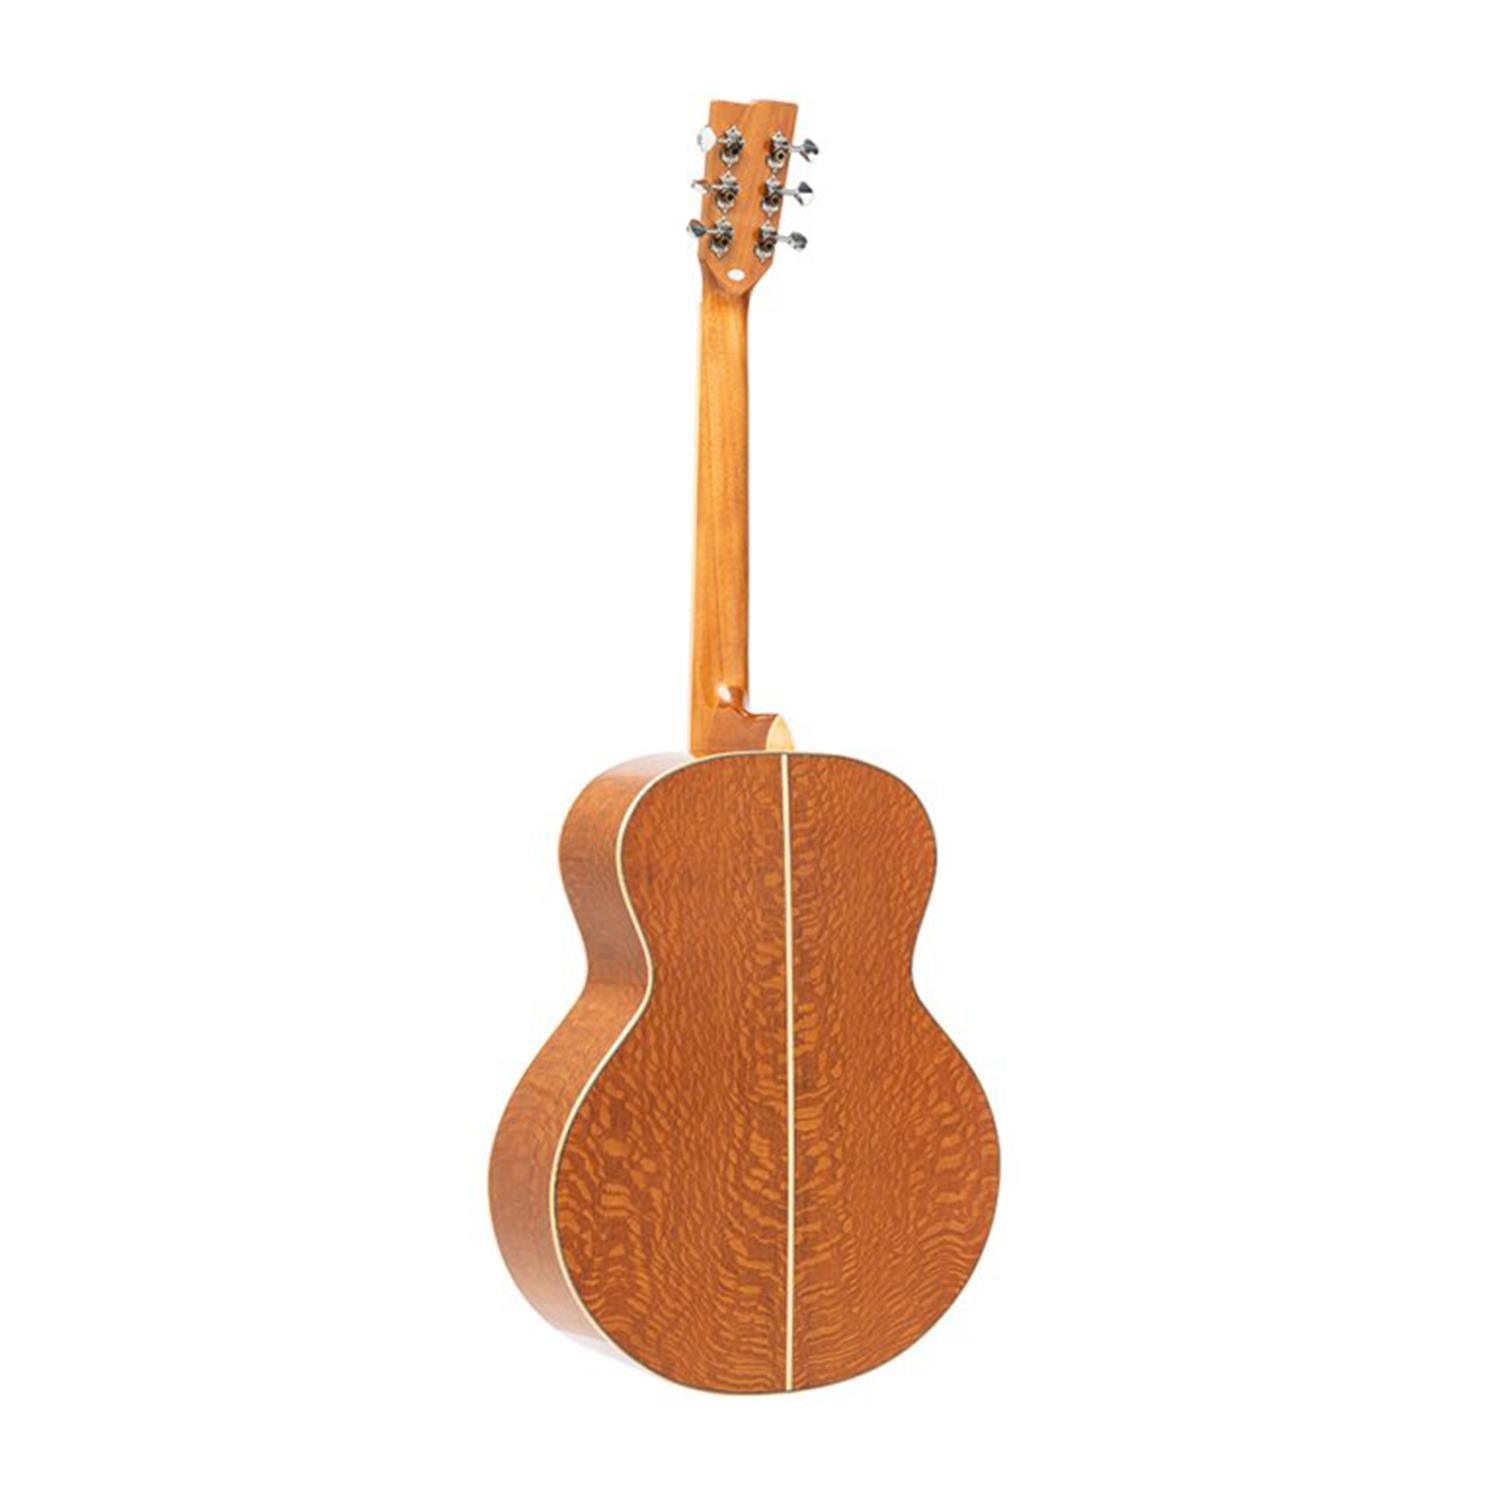 Stagg SA45 O-LW Series 45 Natural Orchestral Acoustic Guitar with Spruce Top - DY Pro Audio